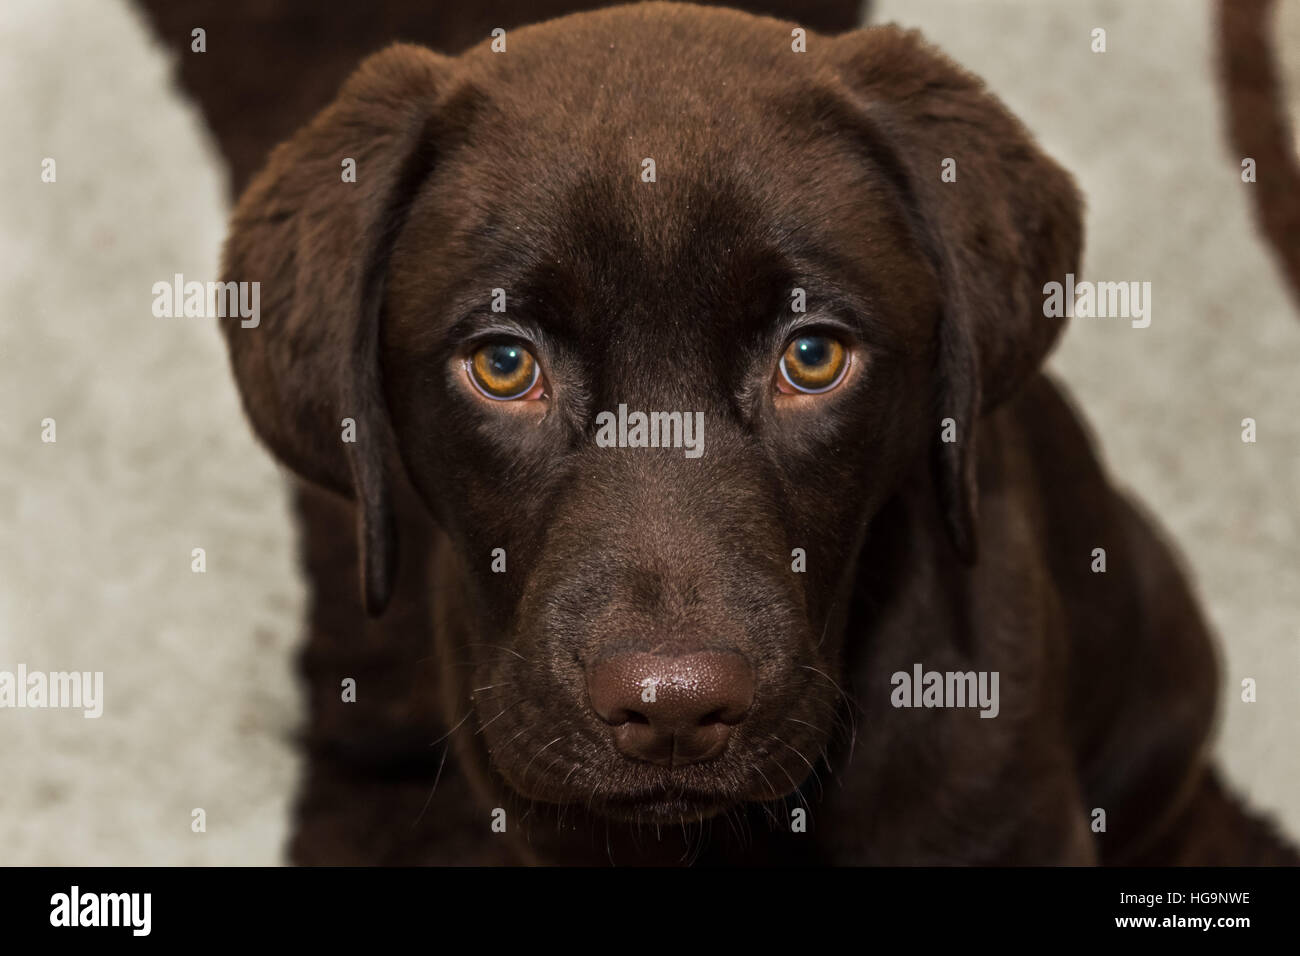 15 week old chocolate labrador with striking eyes sits on the living room floor and patiently awaits a treat for being good. Stock Photo